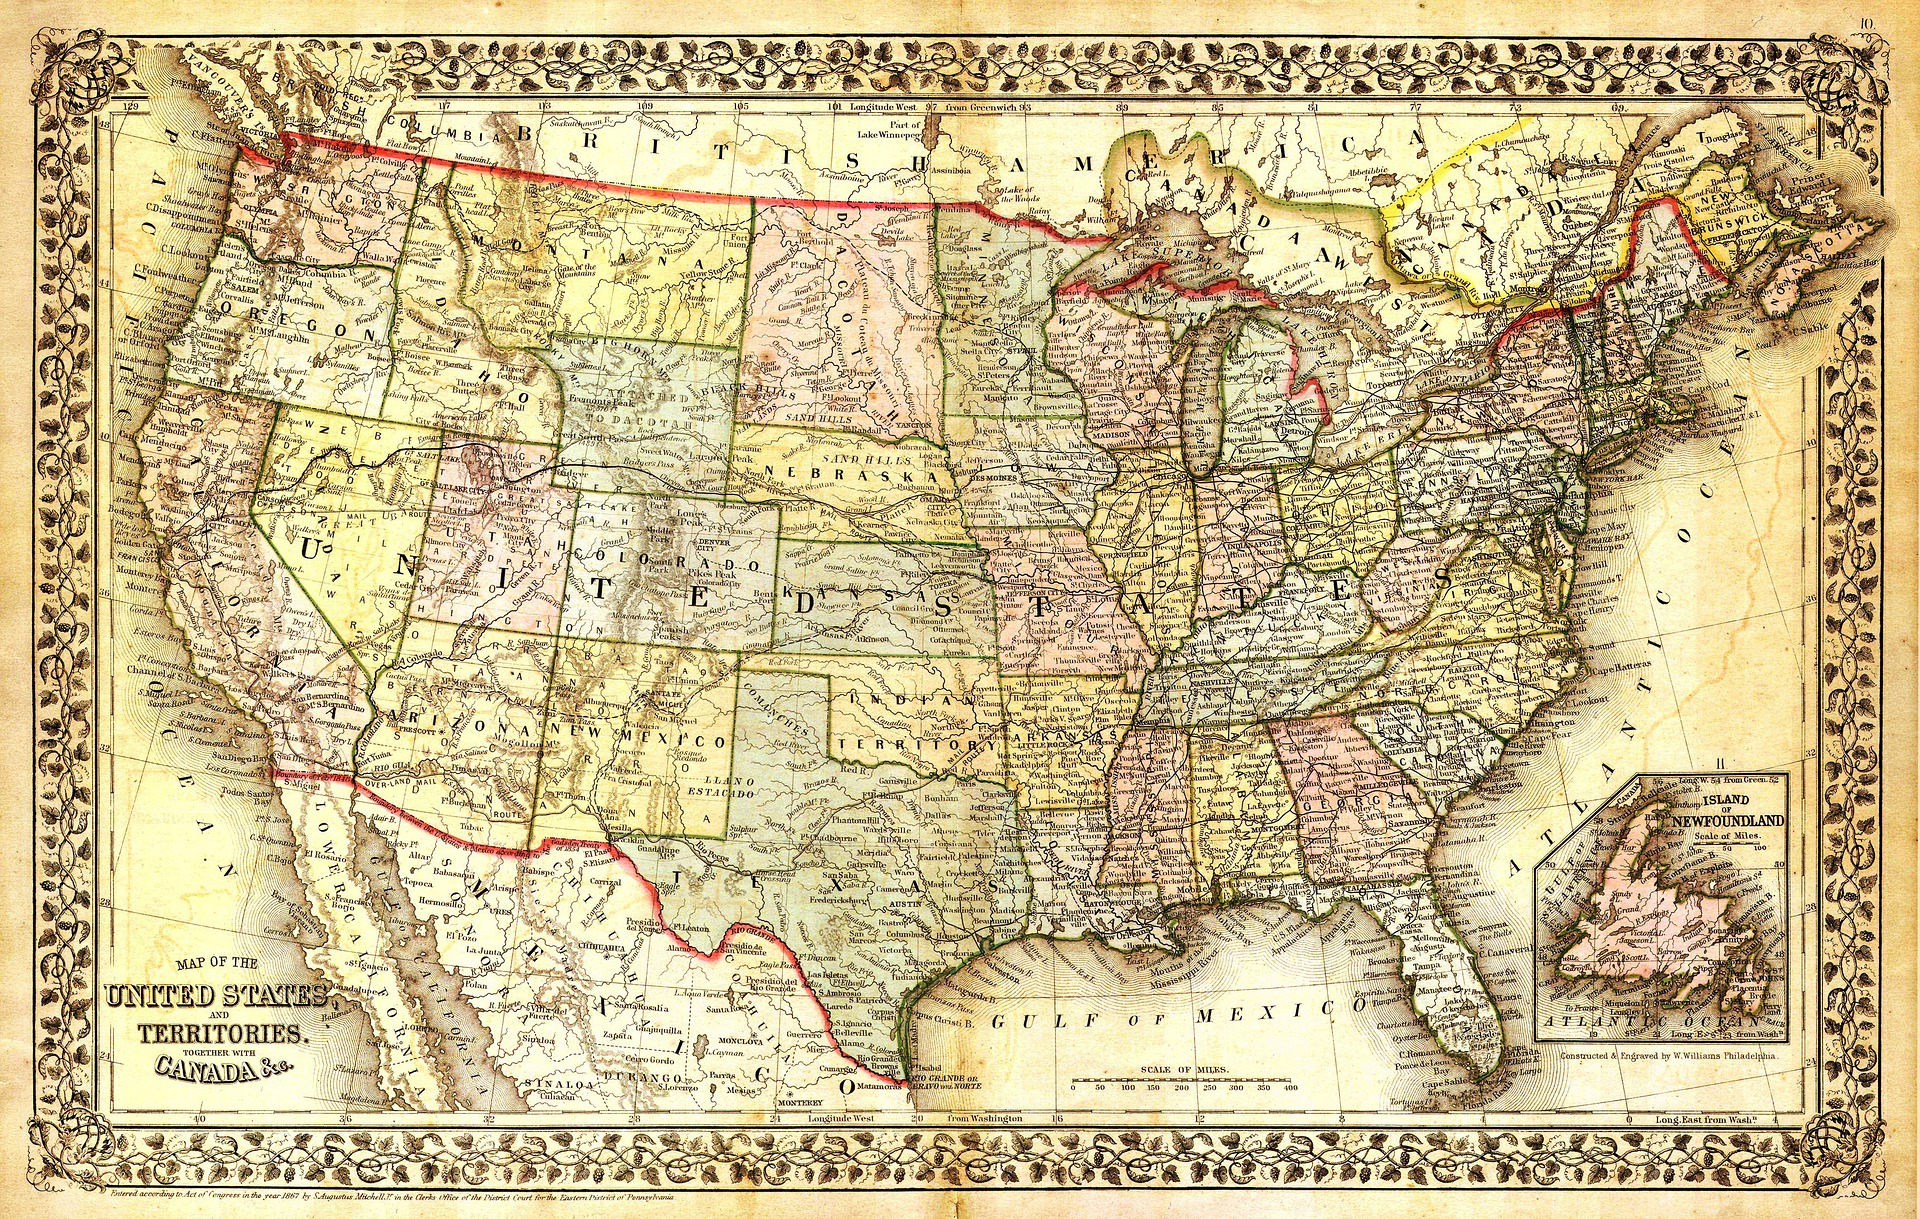 An old map showing the state boundaries of the US states